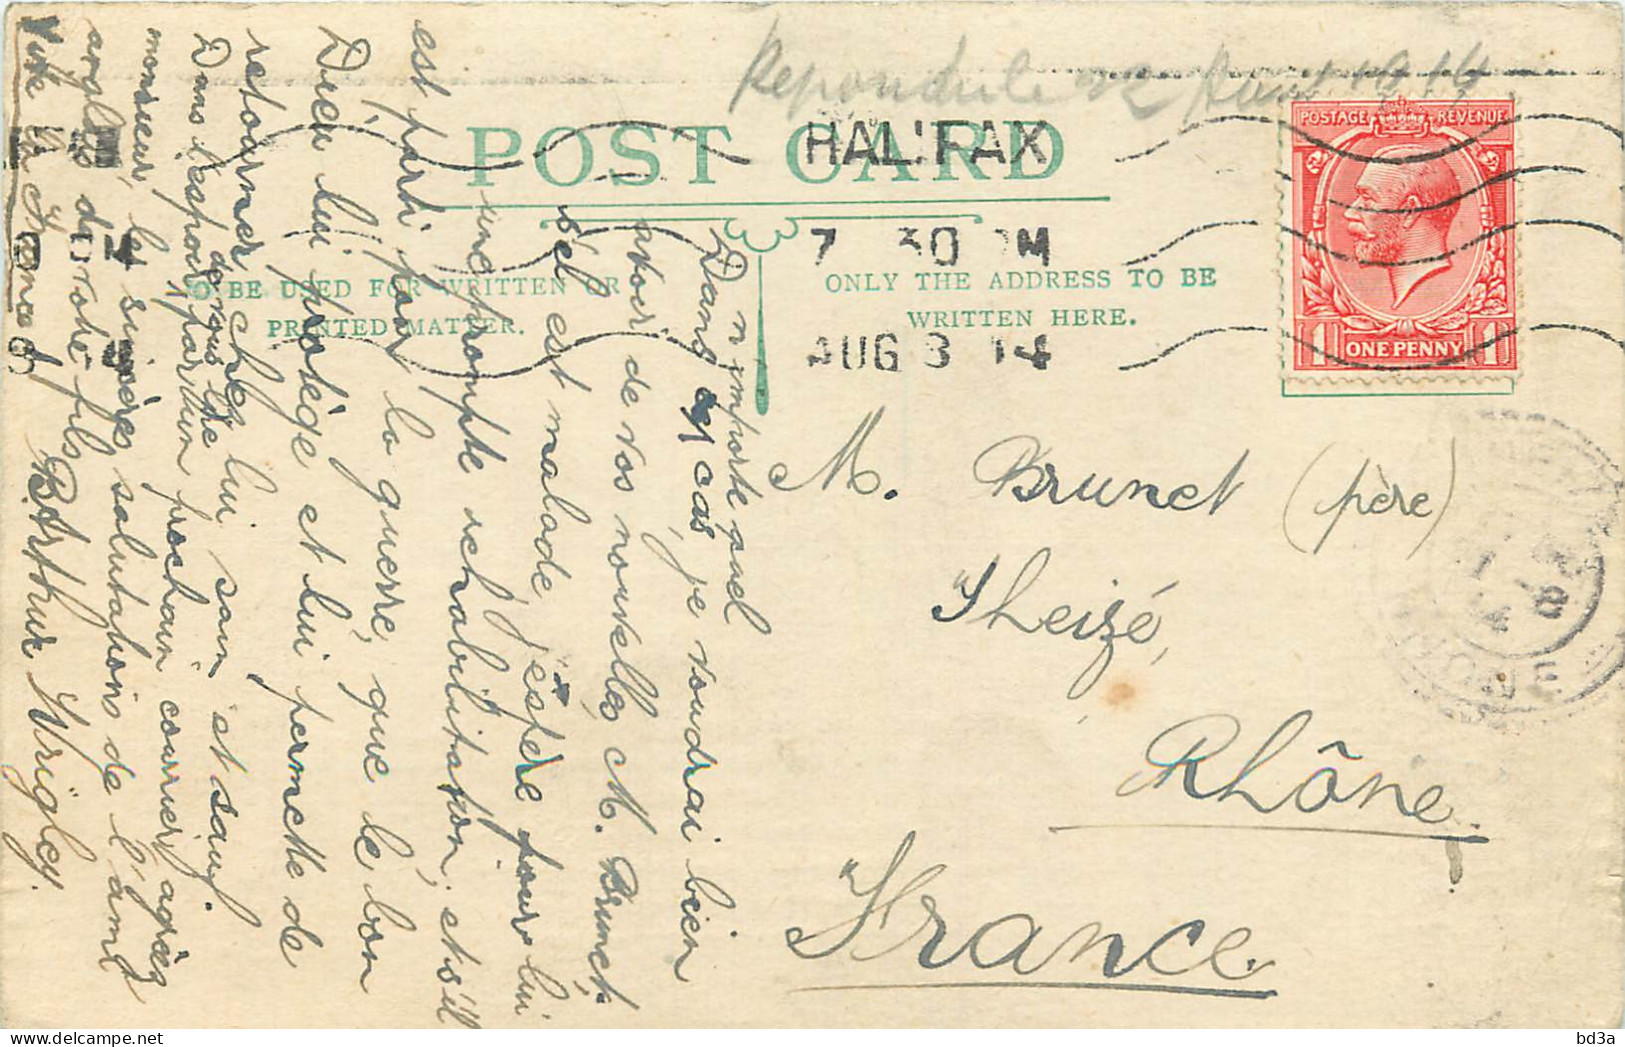  POST CARD - ONE PENNY - Luftpost & Aerogramme